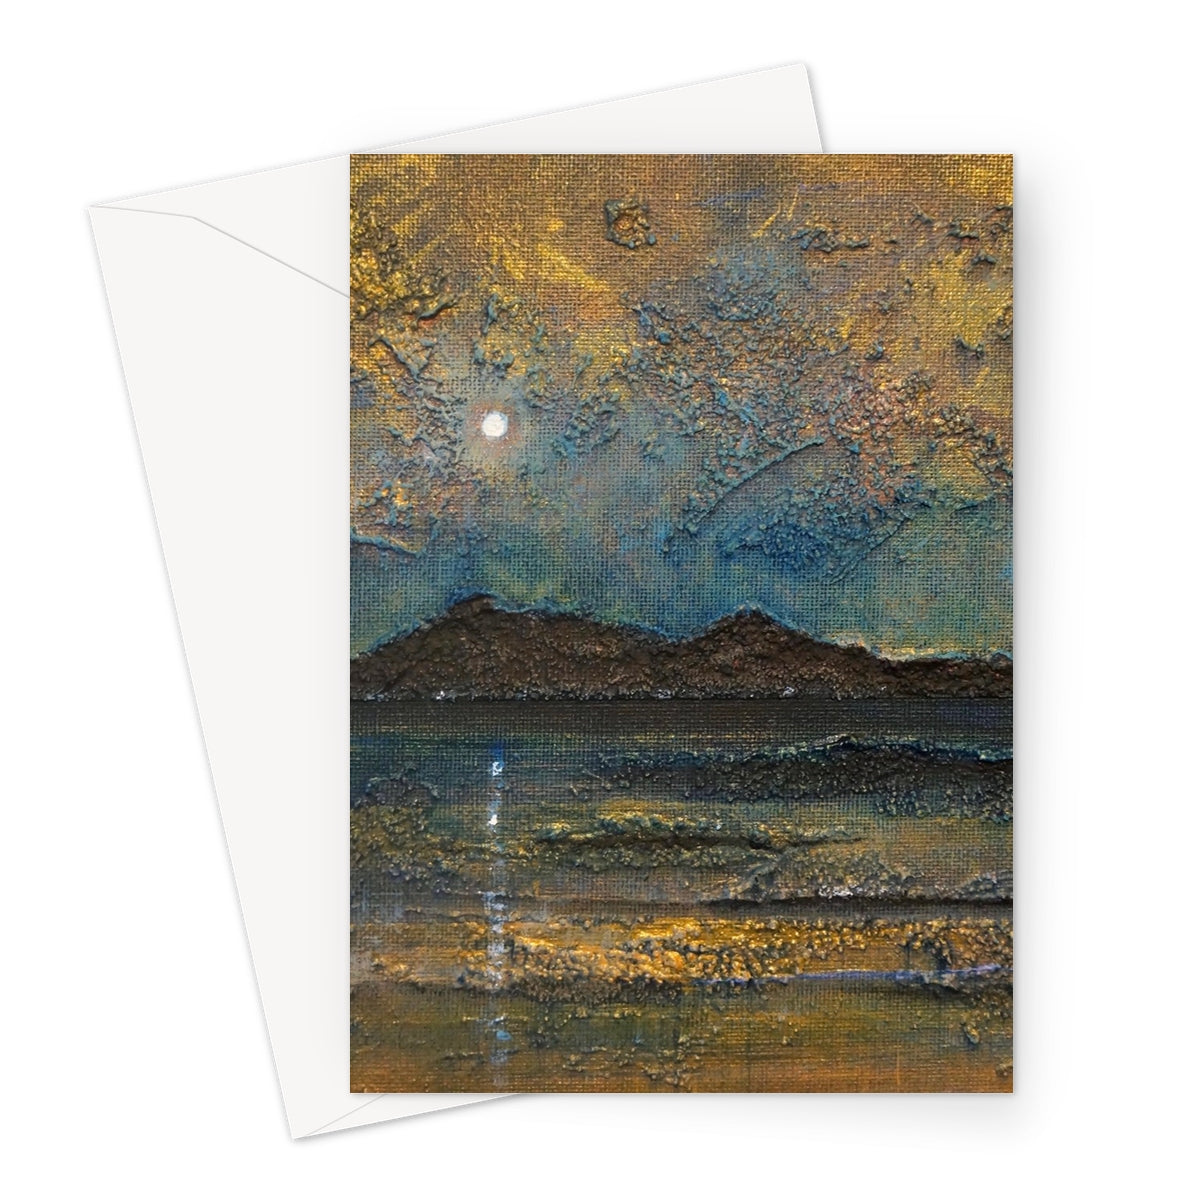 Arran Moonlight Art Gifts Greeting Card-Greetings Cards-Arran Art Gallery-A5 Portrait-10 Cards-Paintings, Prints, Homeware, Art Gifts From Scotland By Scottish Artist Kevin Hunter